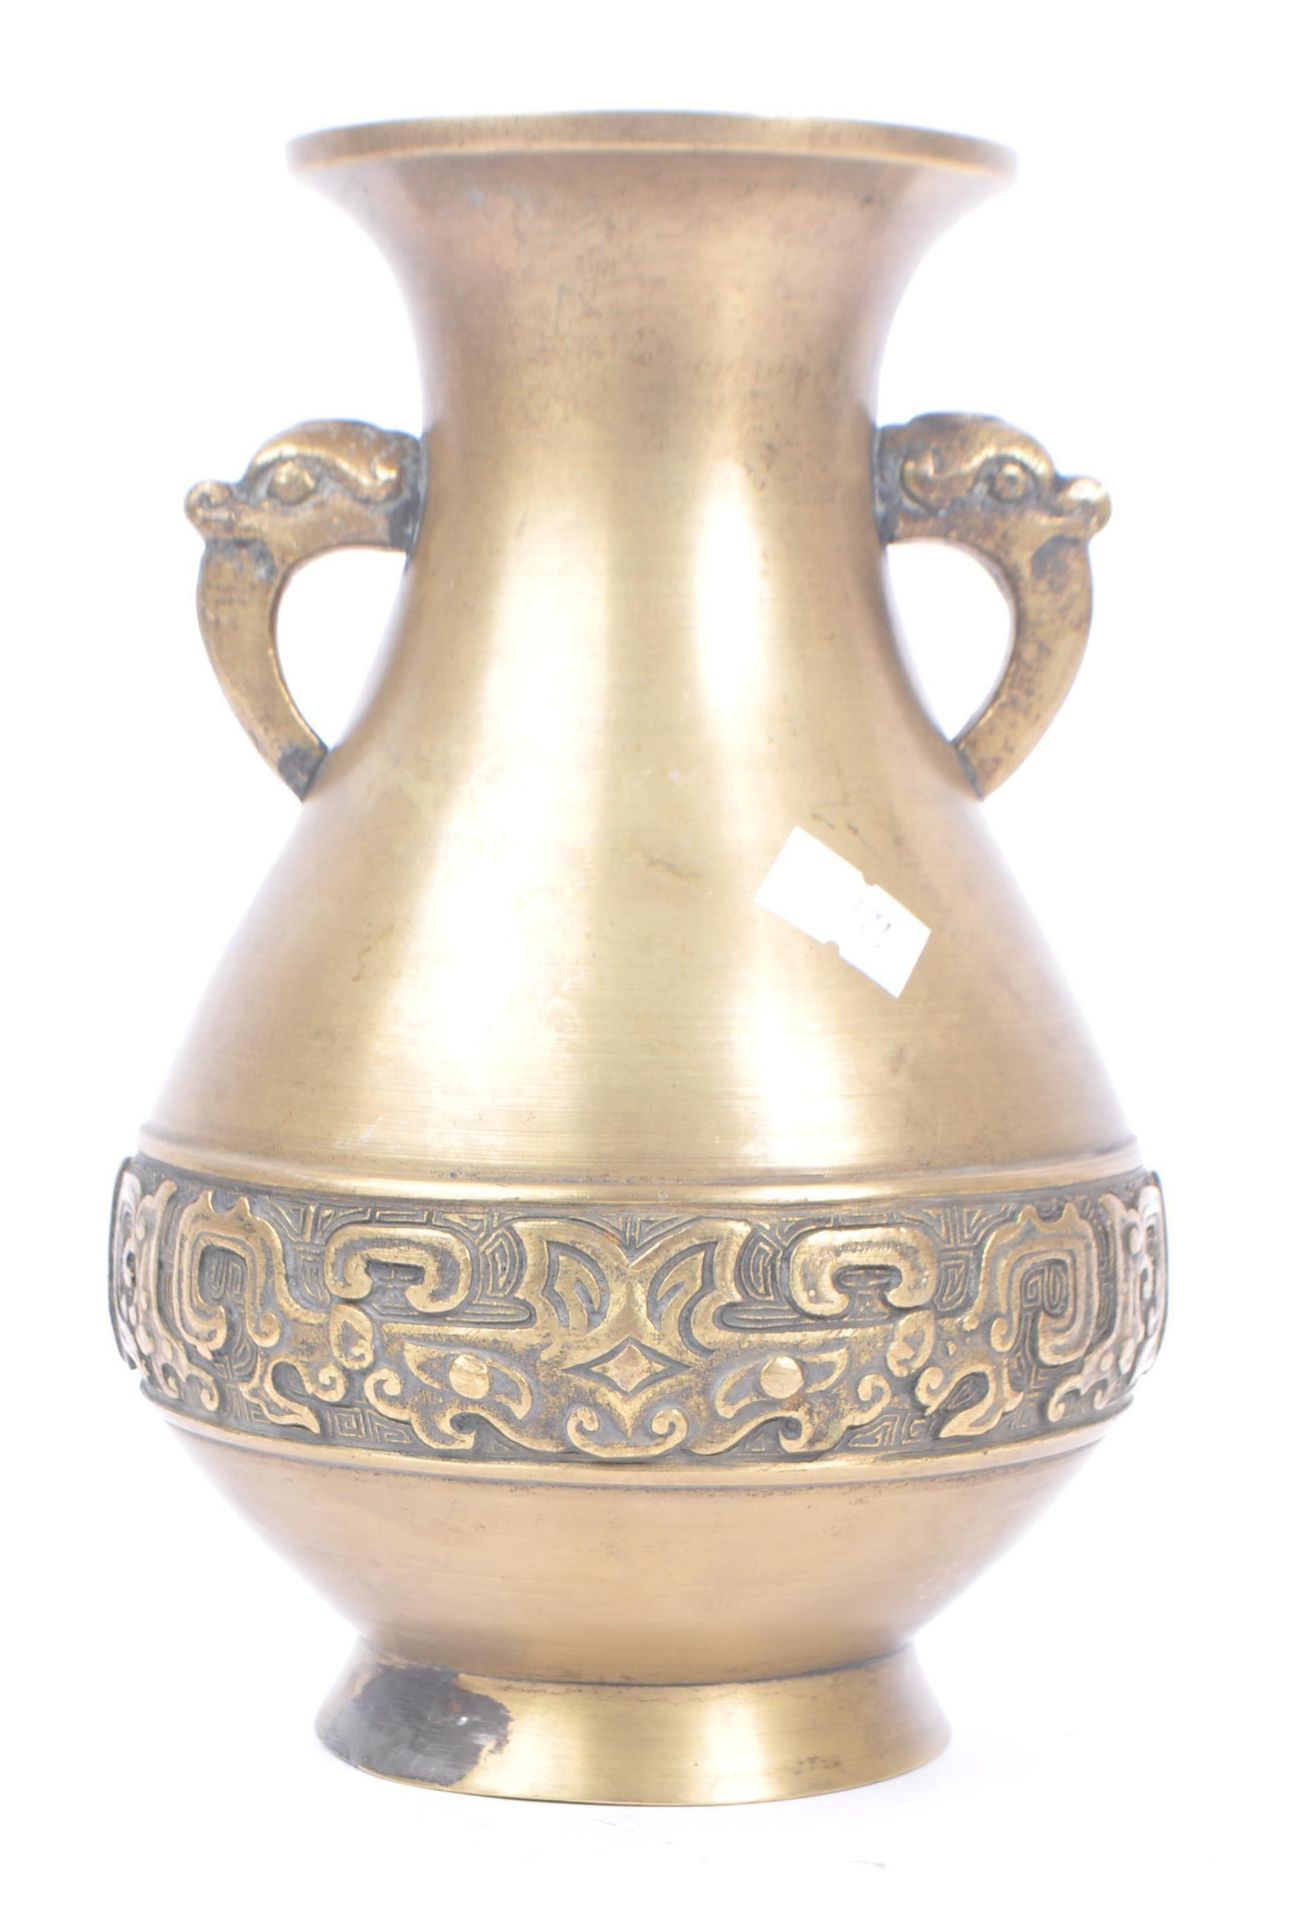 EARLY 20TH CENTURY CHINESE BRASS VASE - Image 3 of 6